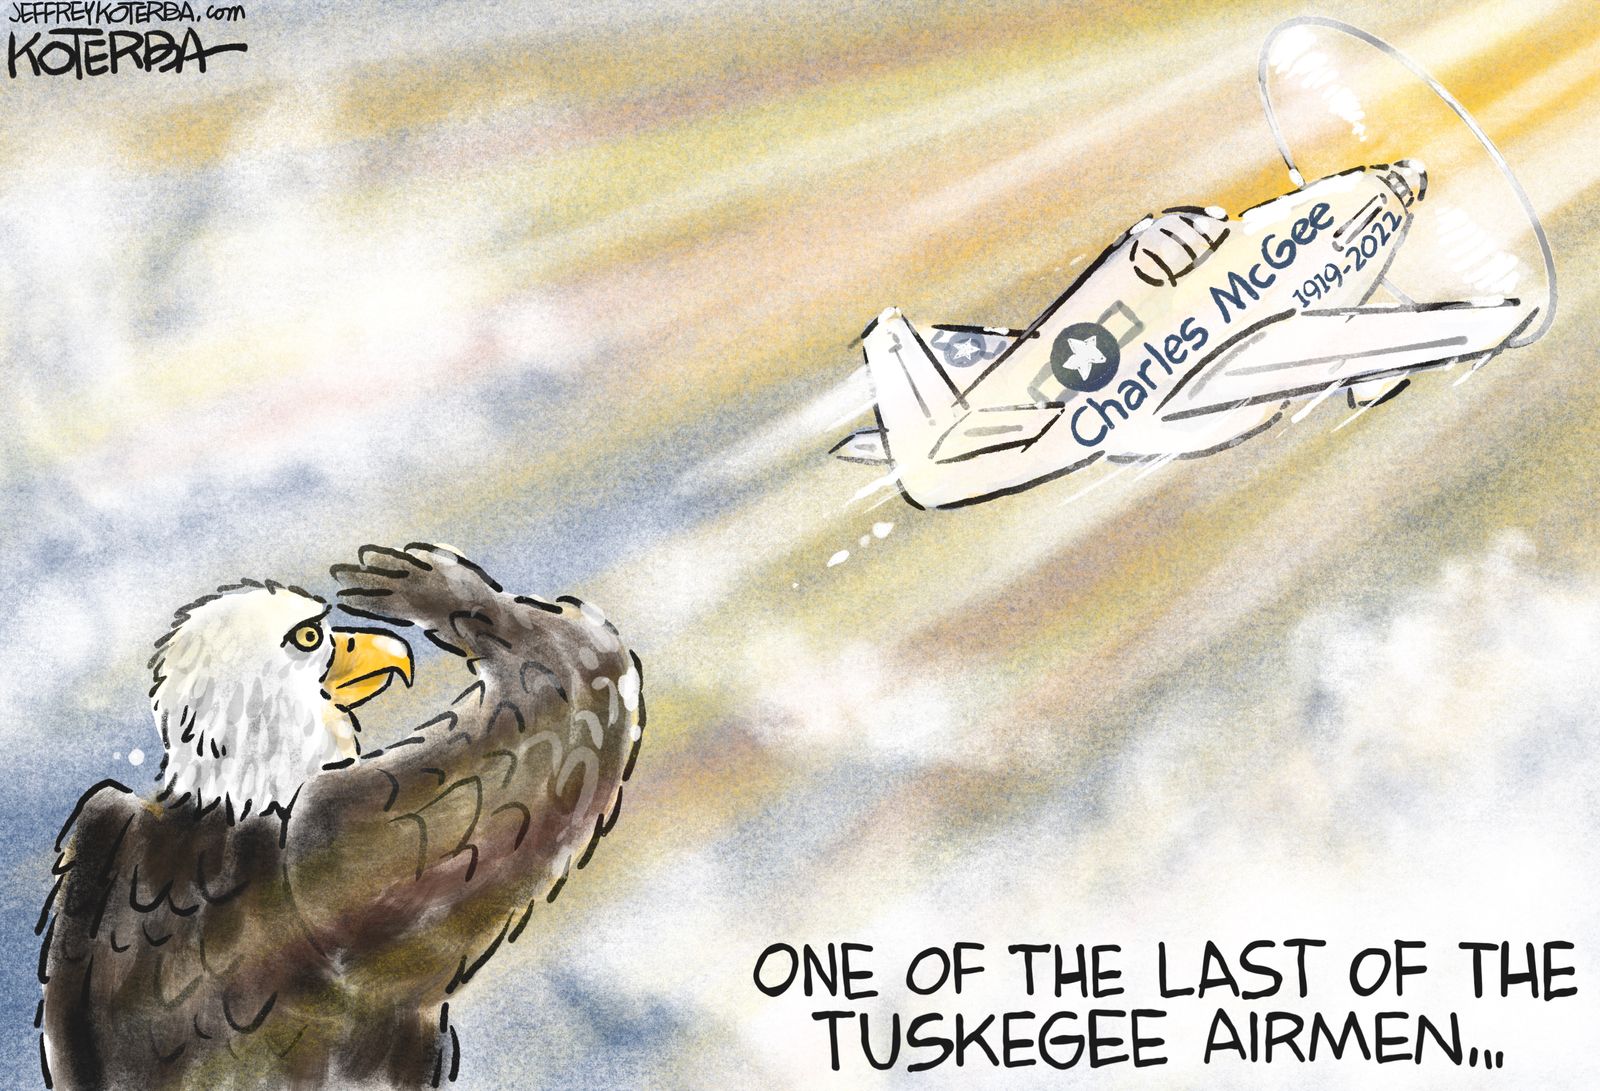 Last of the Tuskegee Airmen